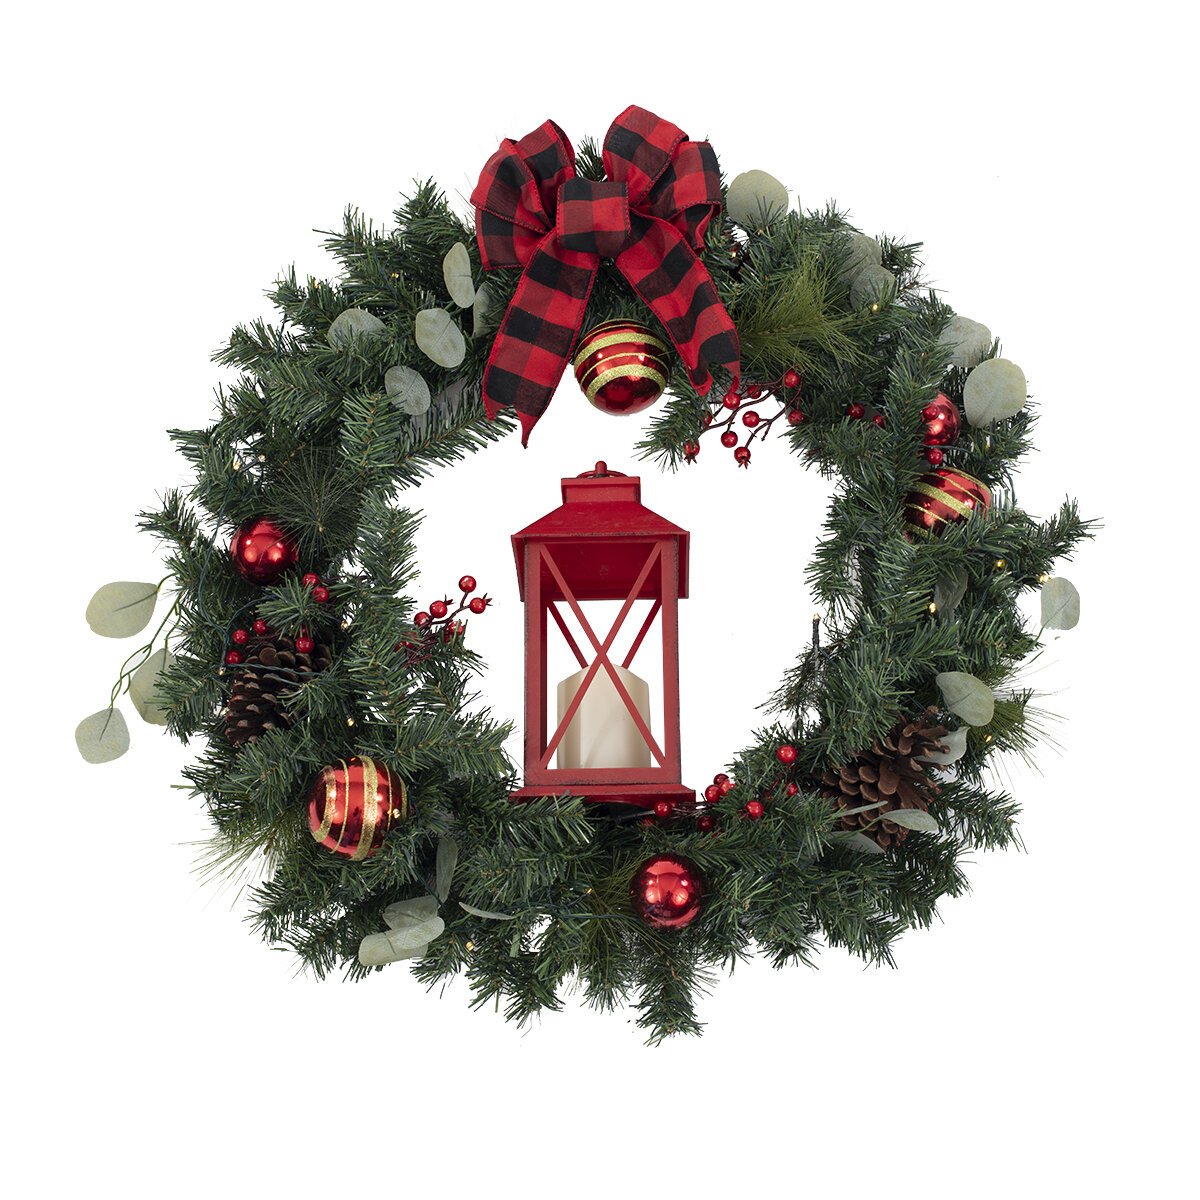 Christmas Wreath Front Door Snowman Wreath Winter Wreath Snow Day Wreath Holiday Wreath Large Bow Snowy Greens Free Shipping Gift